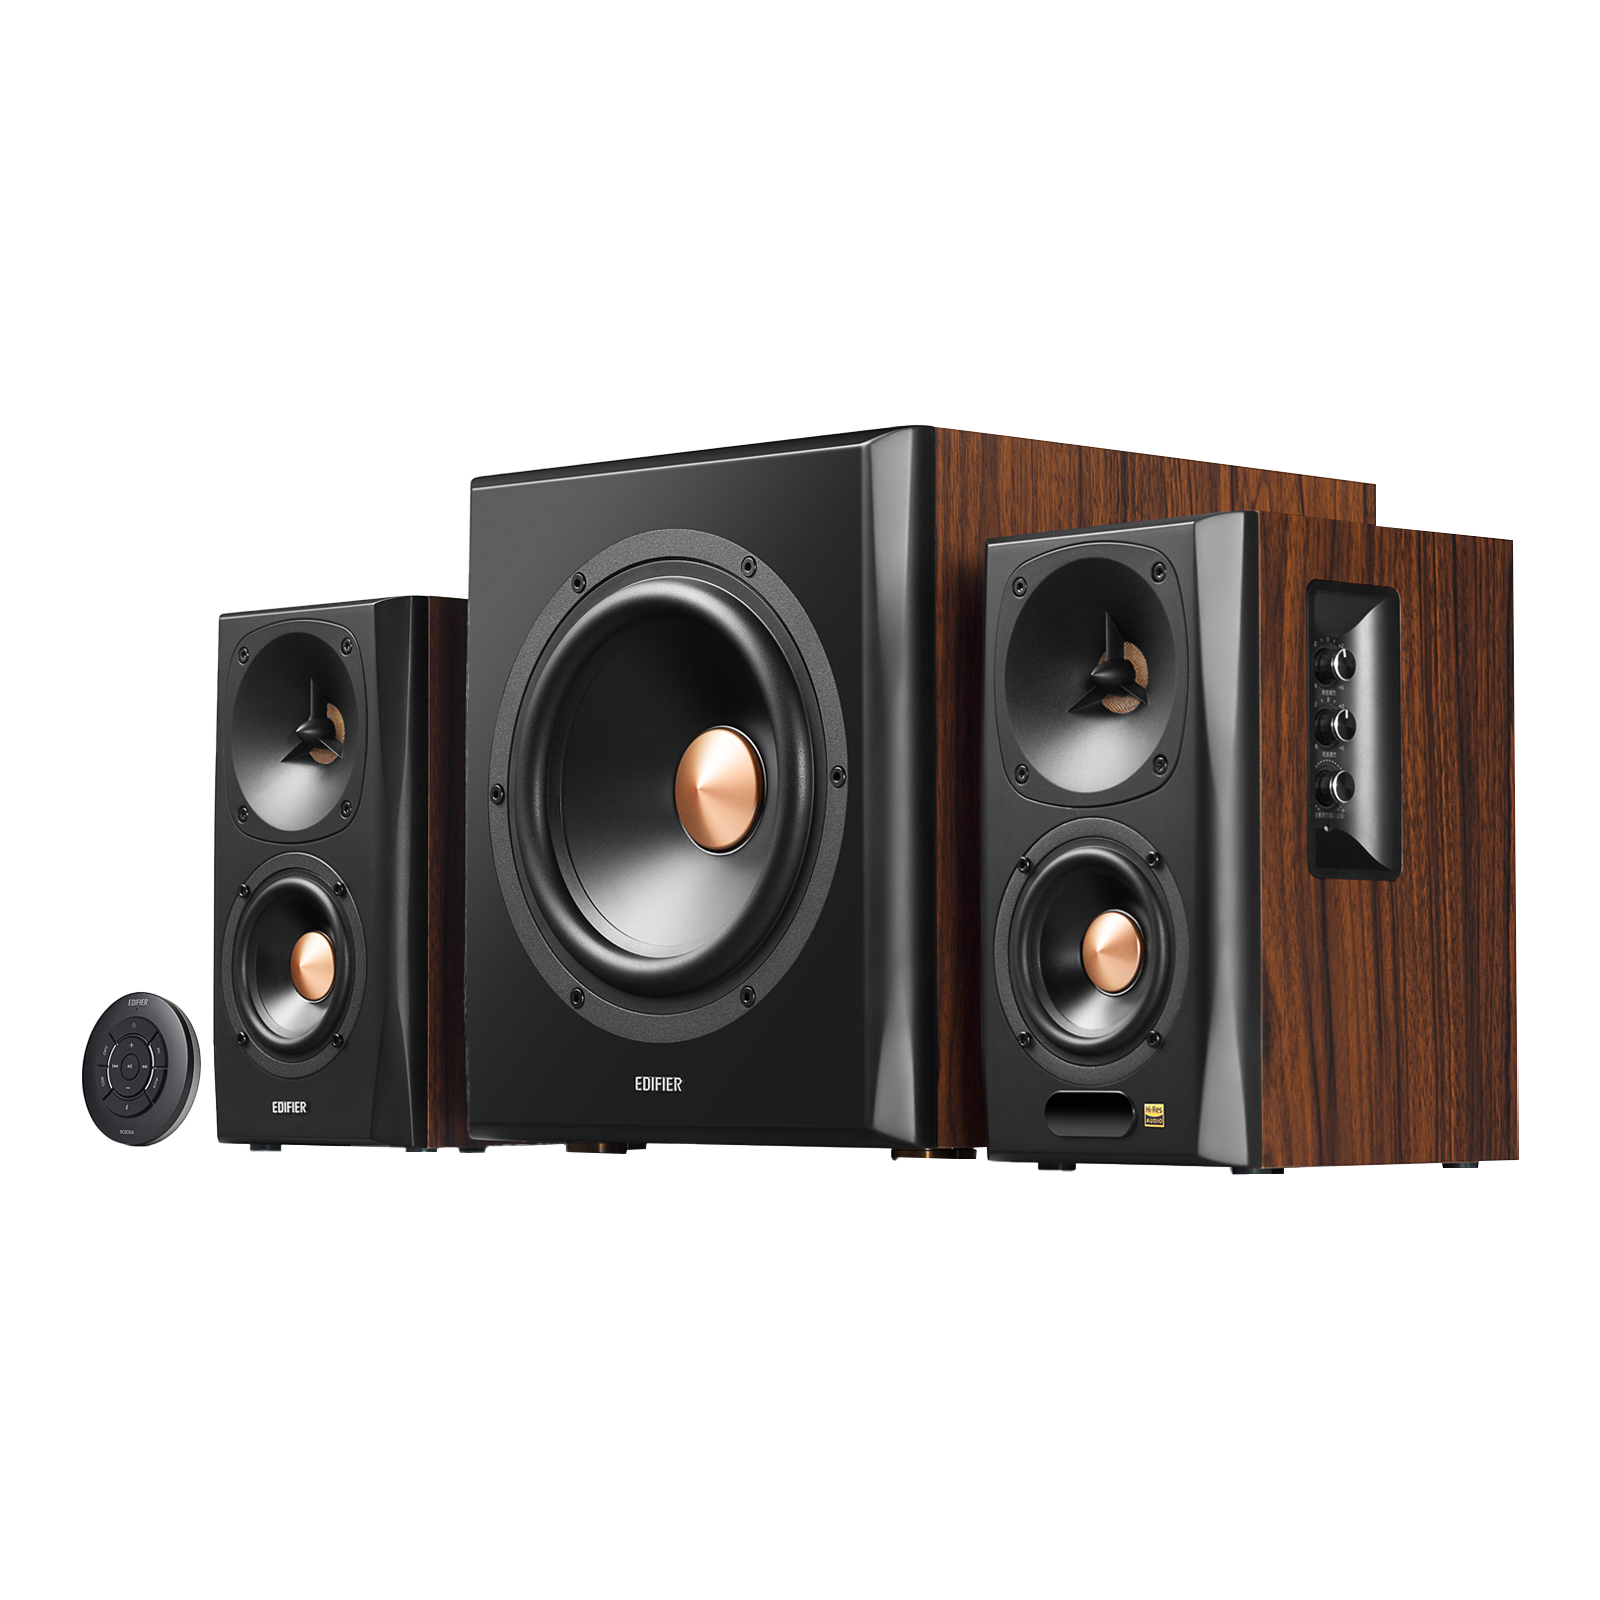 S360DB 2.1 Speakers Hi-Res Audio with wireless subwoofer